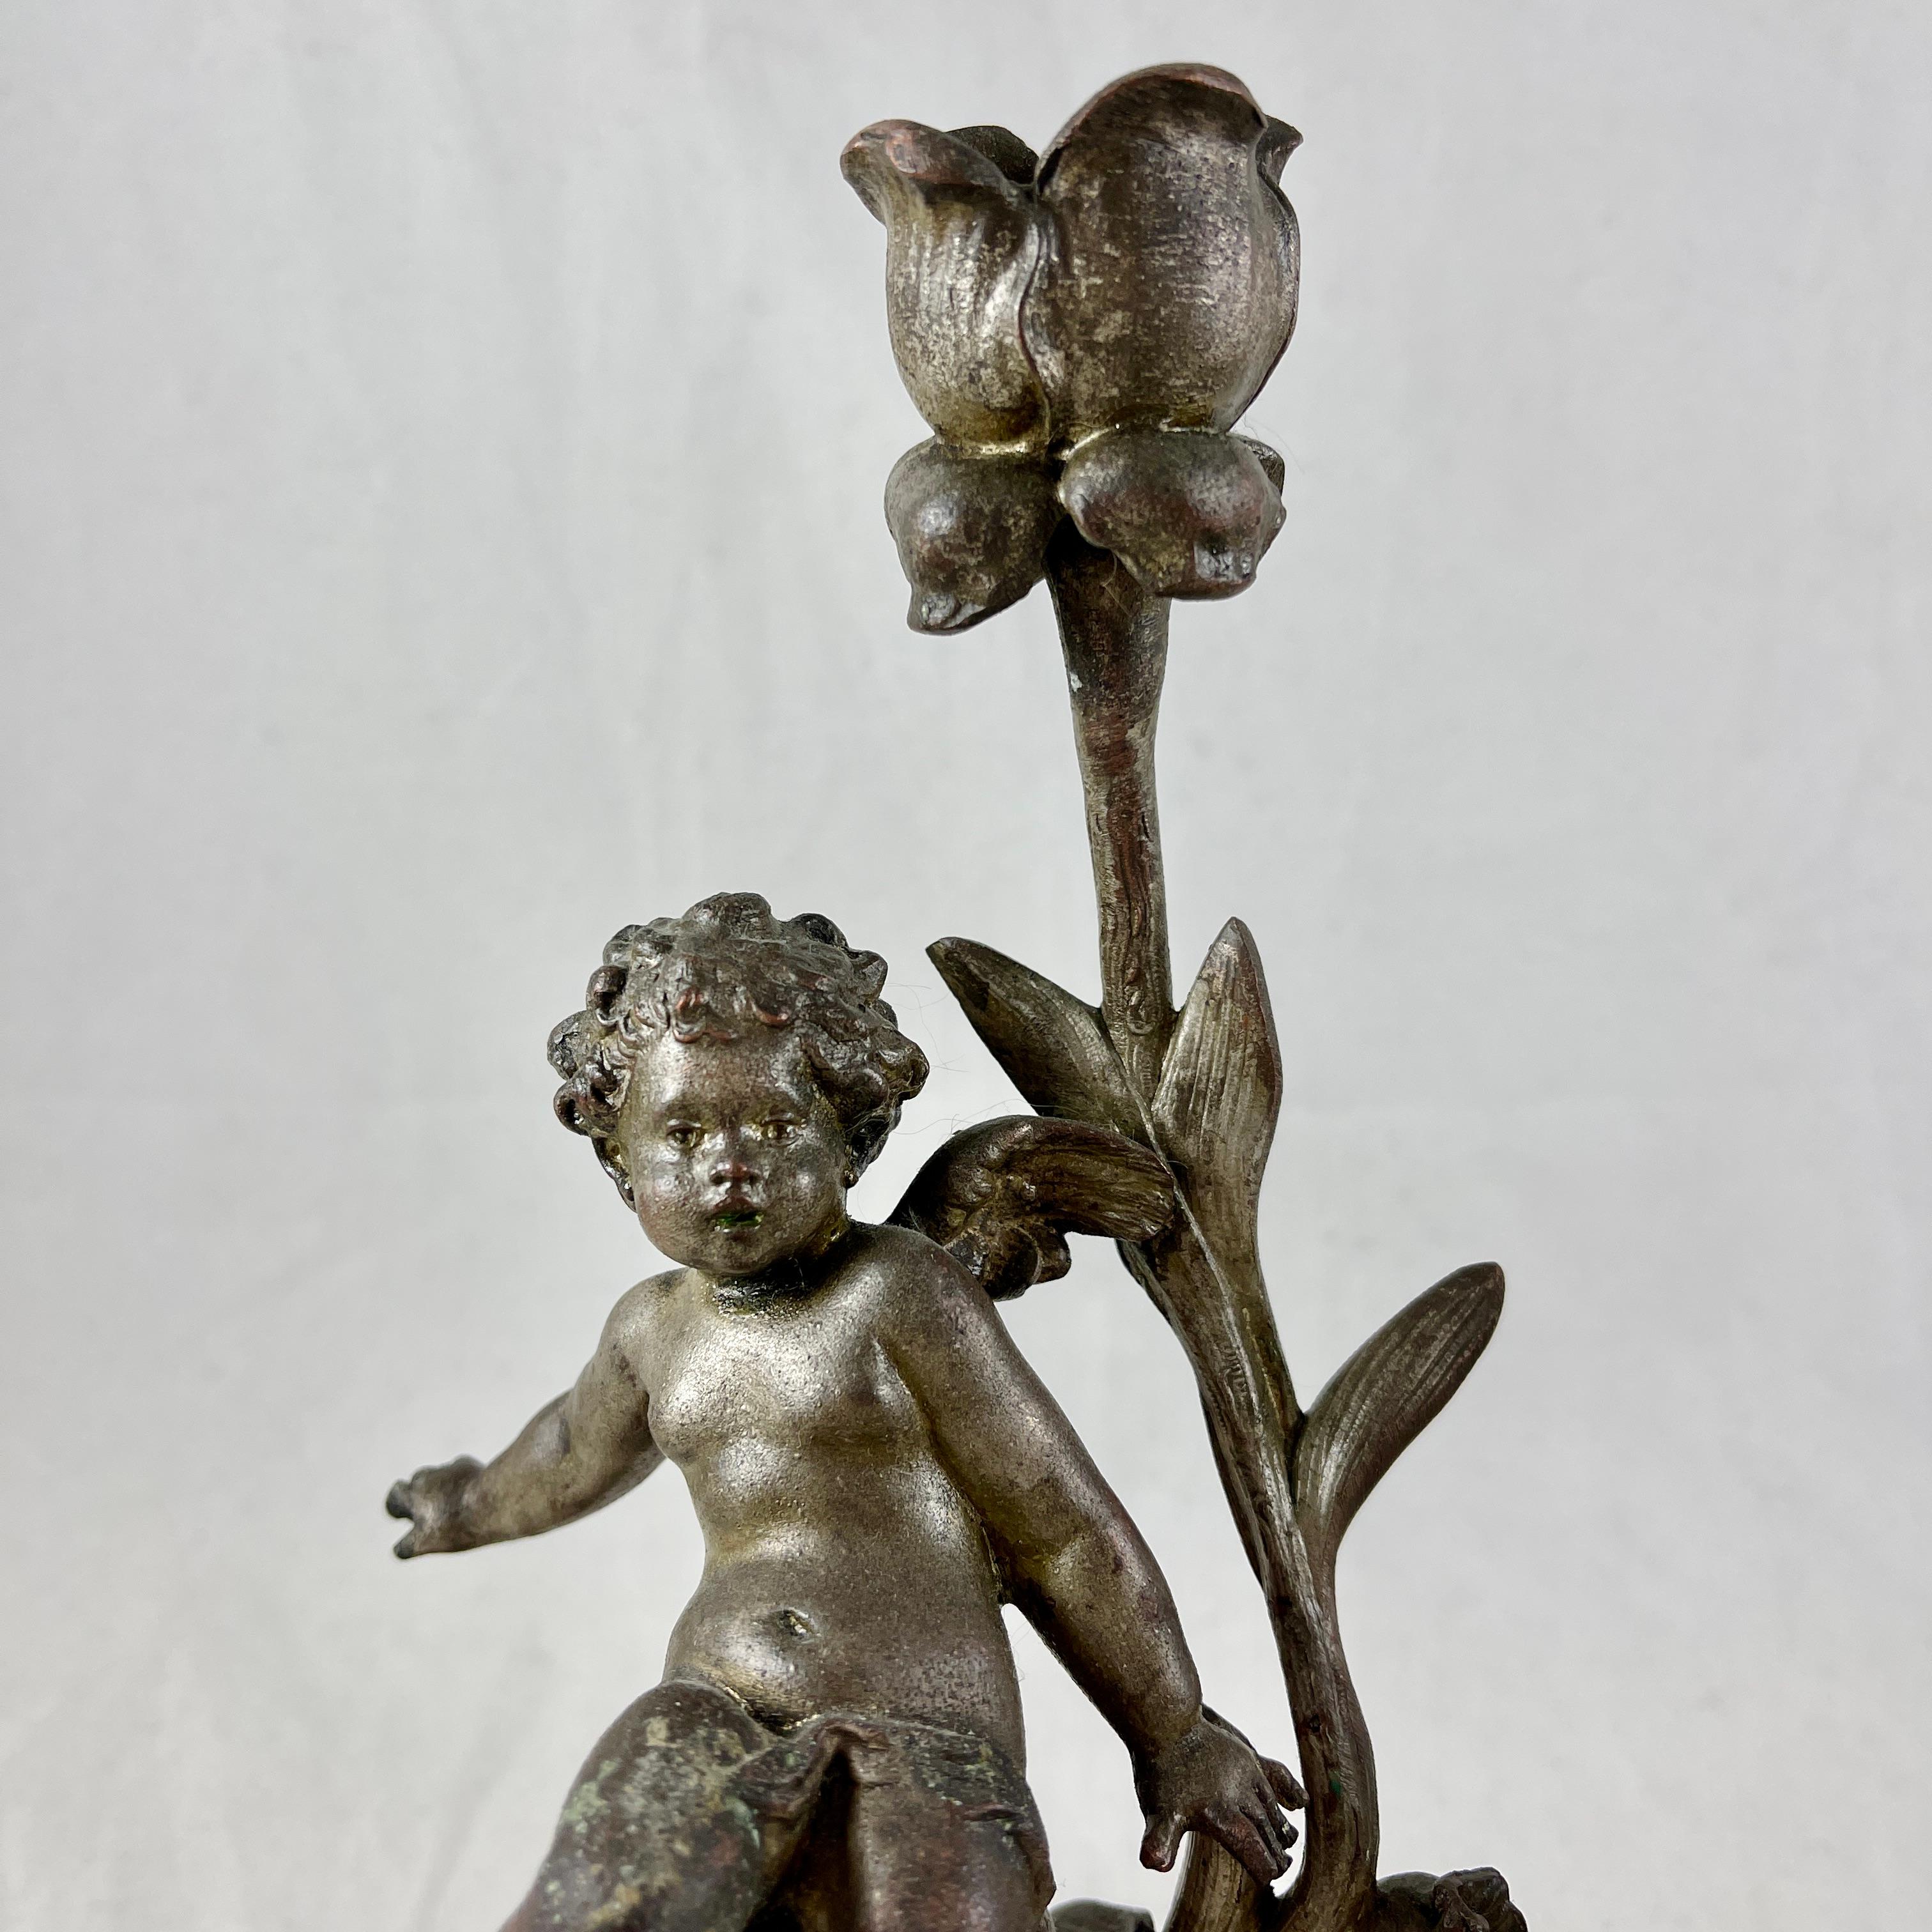 Cast French Putti Cherub Candlesticks Signed Sylvain Kinsburger Spelter & Marble S/2 For Sale